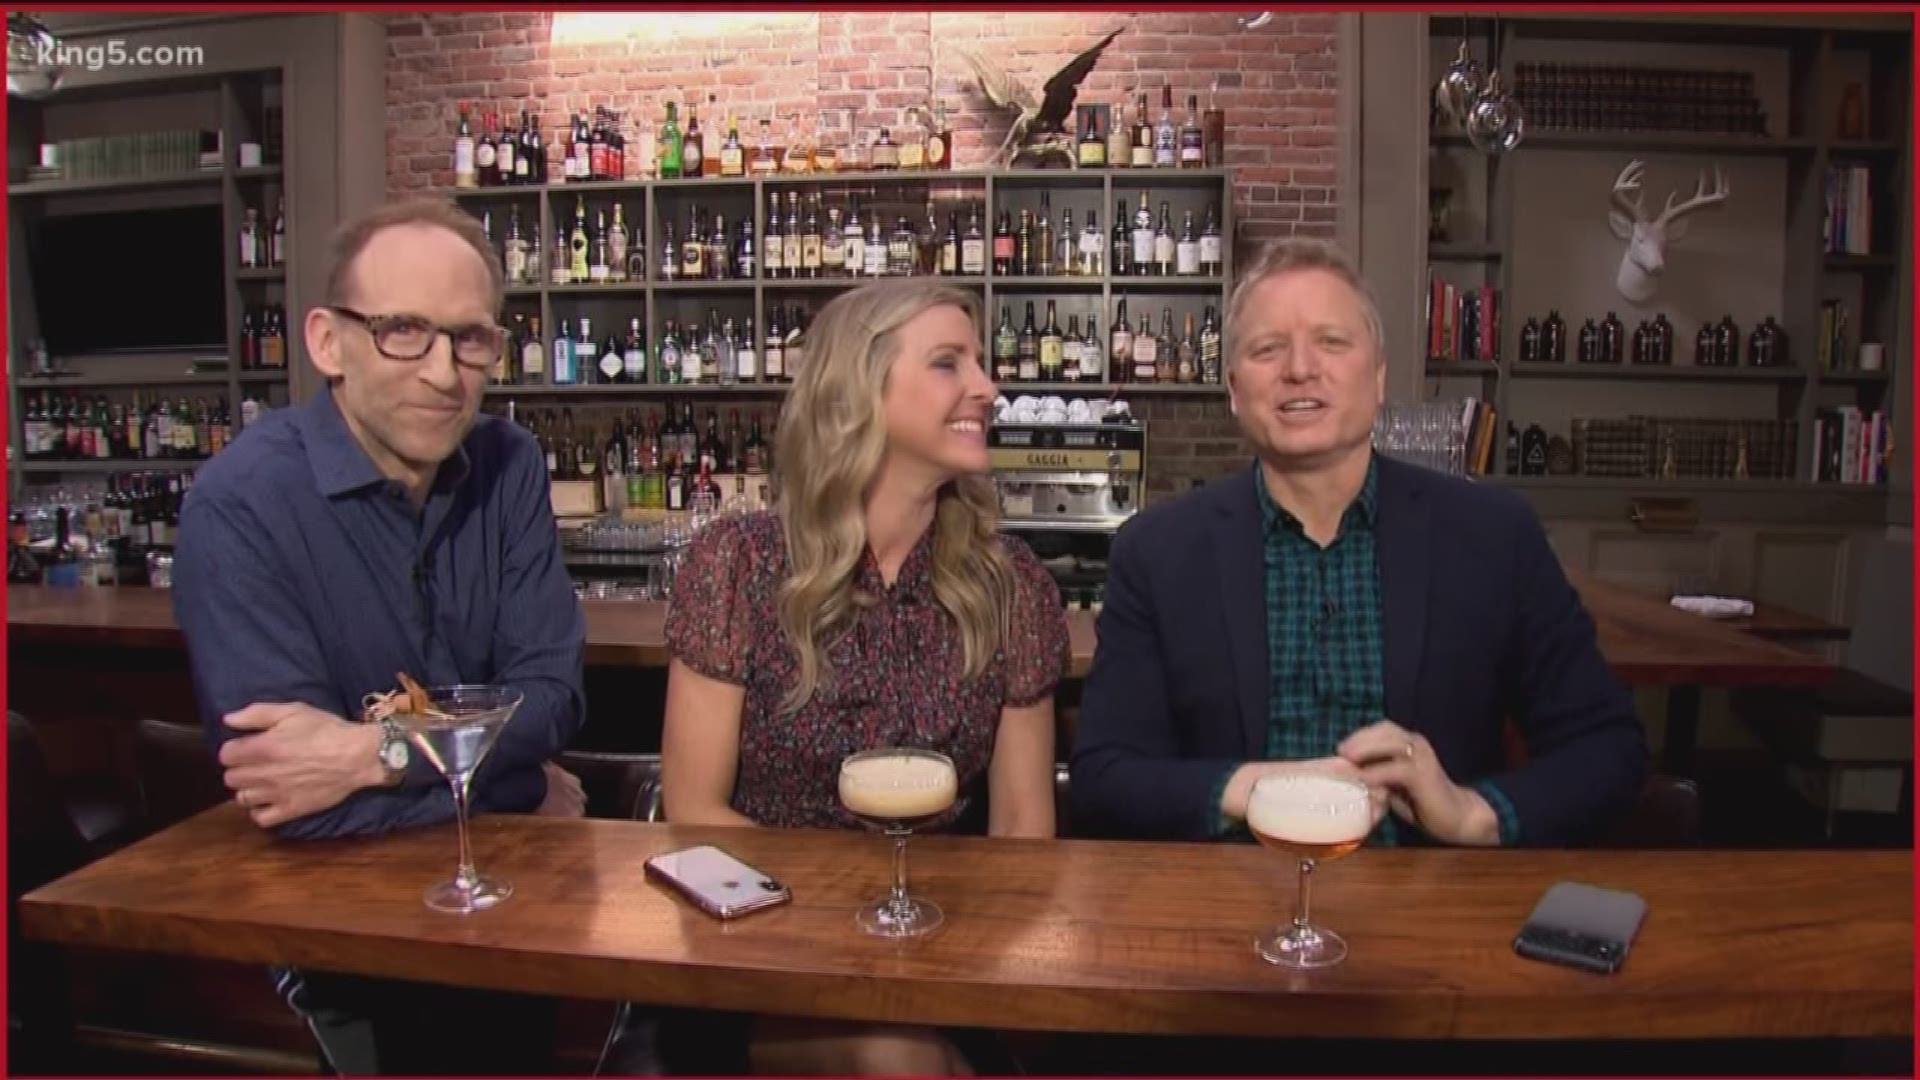 Kim, Michael and Jim host from the trendy HEADS AND TAILS restaurant in Ballard. Featuring TripFit, Marshmallow Farming, Extreme Hopscotch, the newest trend in milk- Grizzly Milk, the hot spring plant from Ciscoe, that's a thing- dog collars and t-mobile, and a unicycle ride share